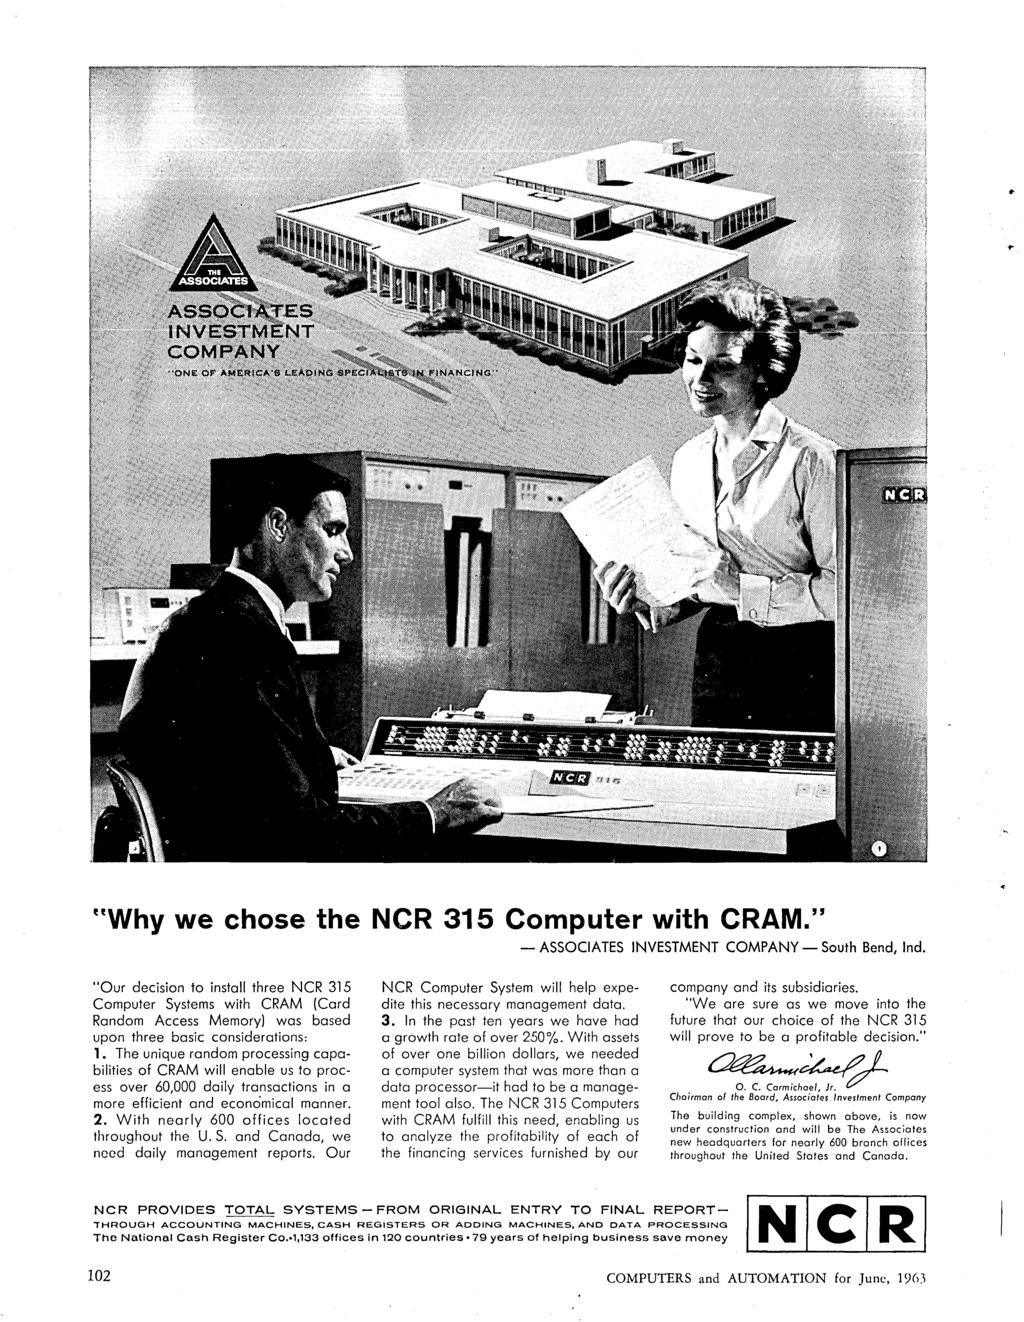 UWhy we chose the NCR 315 Computer with CRAM." - ASSOCIATES INVESTMENT COMPANY - South Bend, Ind.